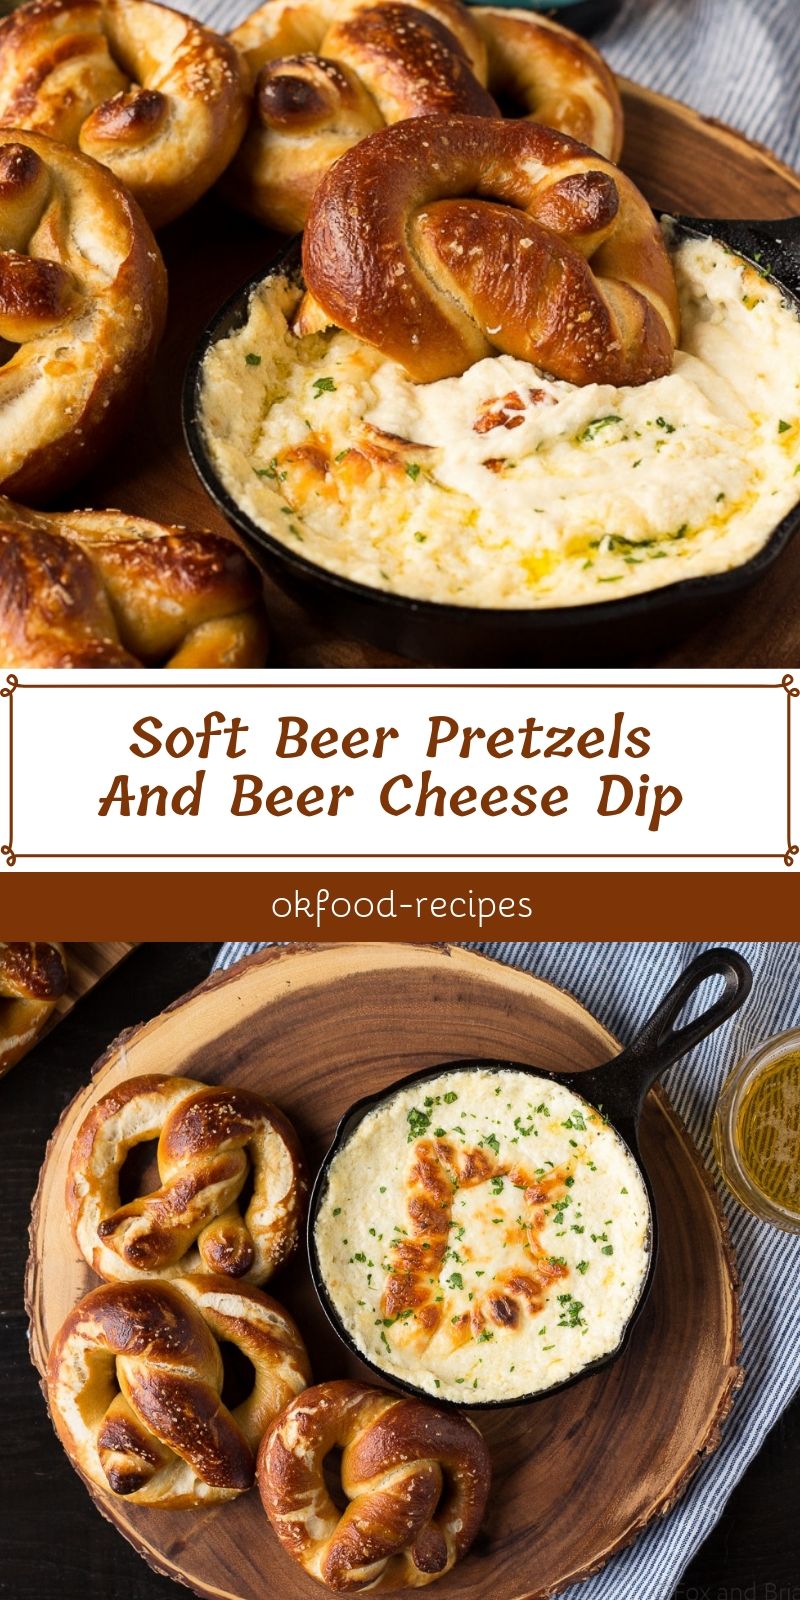 Soft Beer Pretzels And Beer Cheese Dip